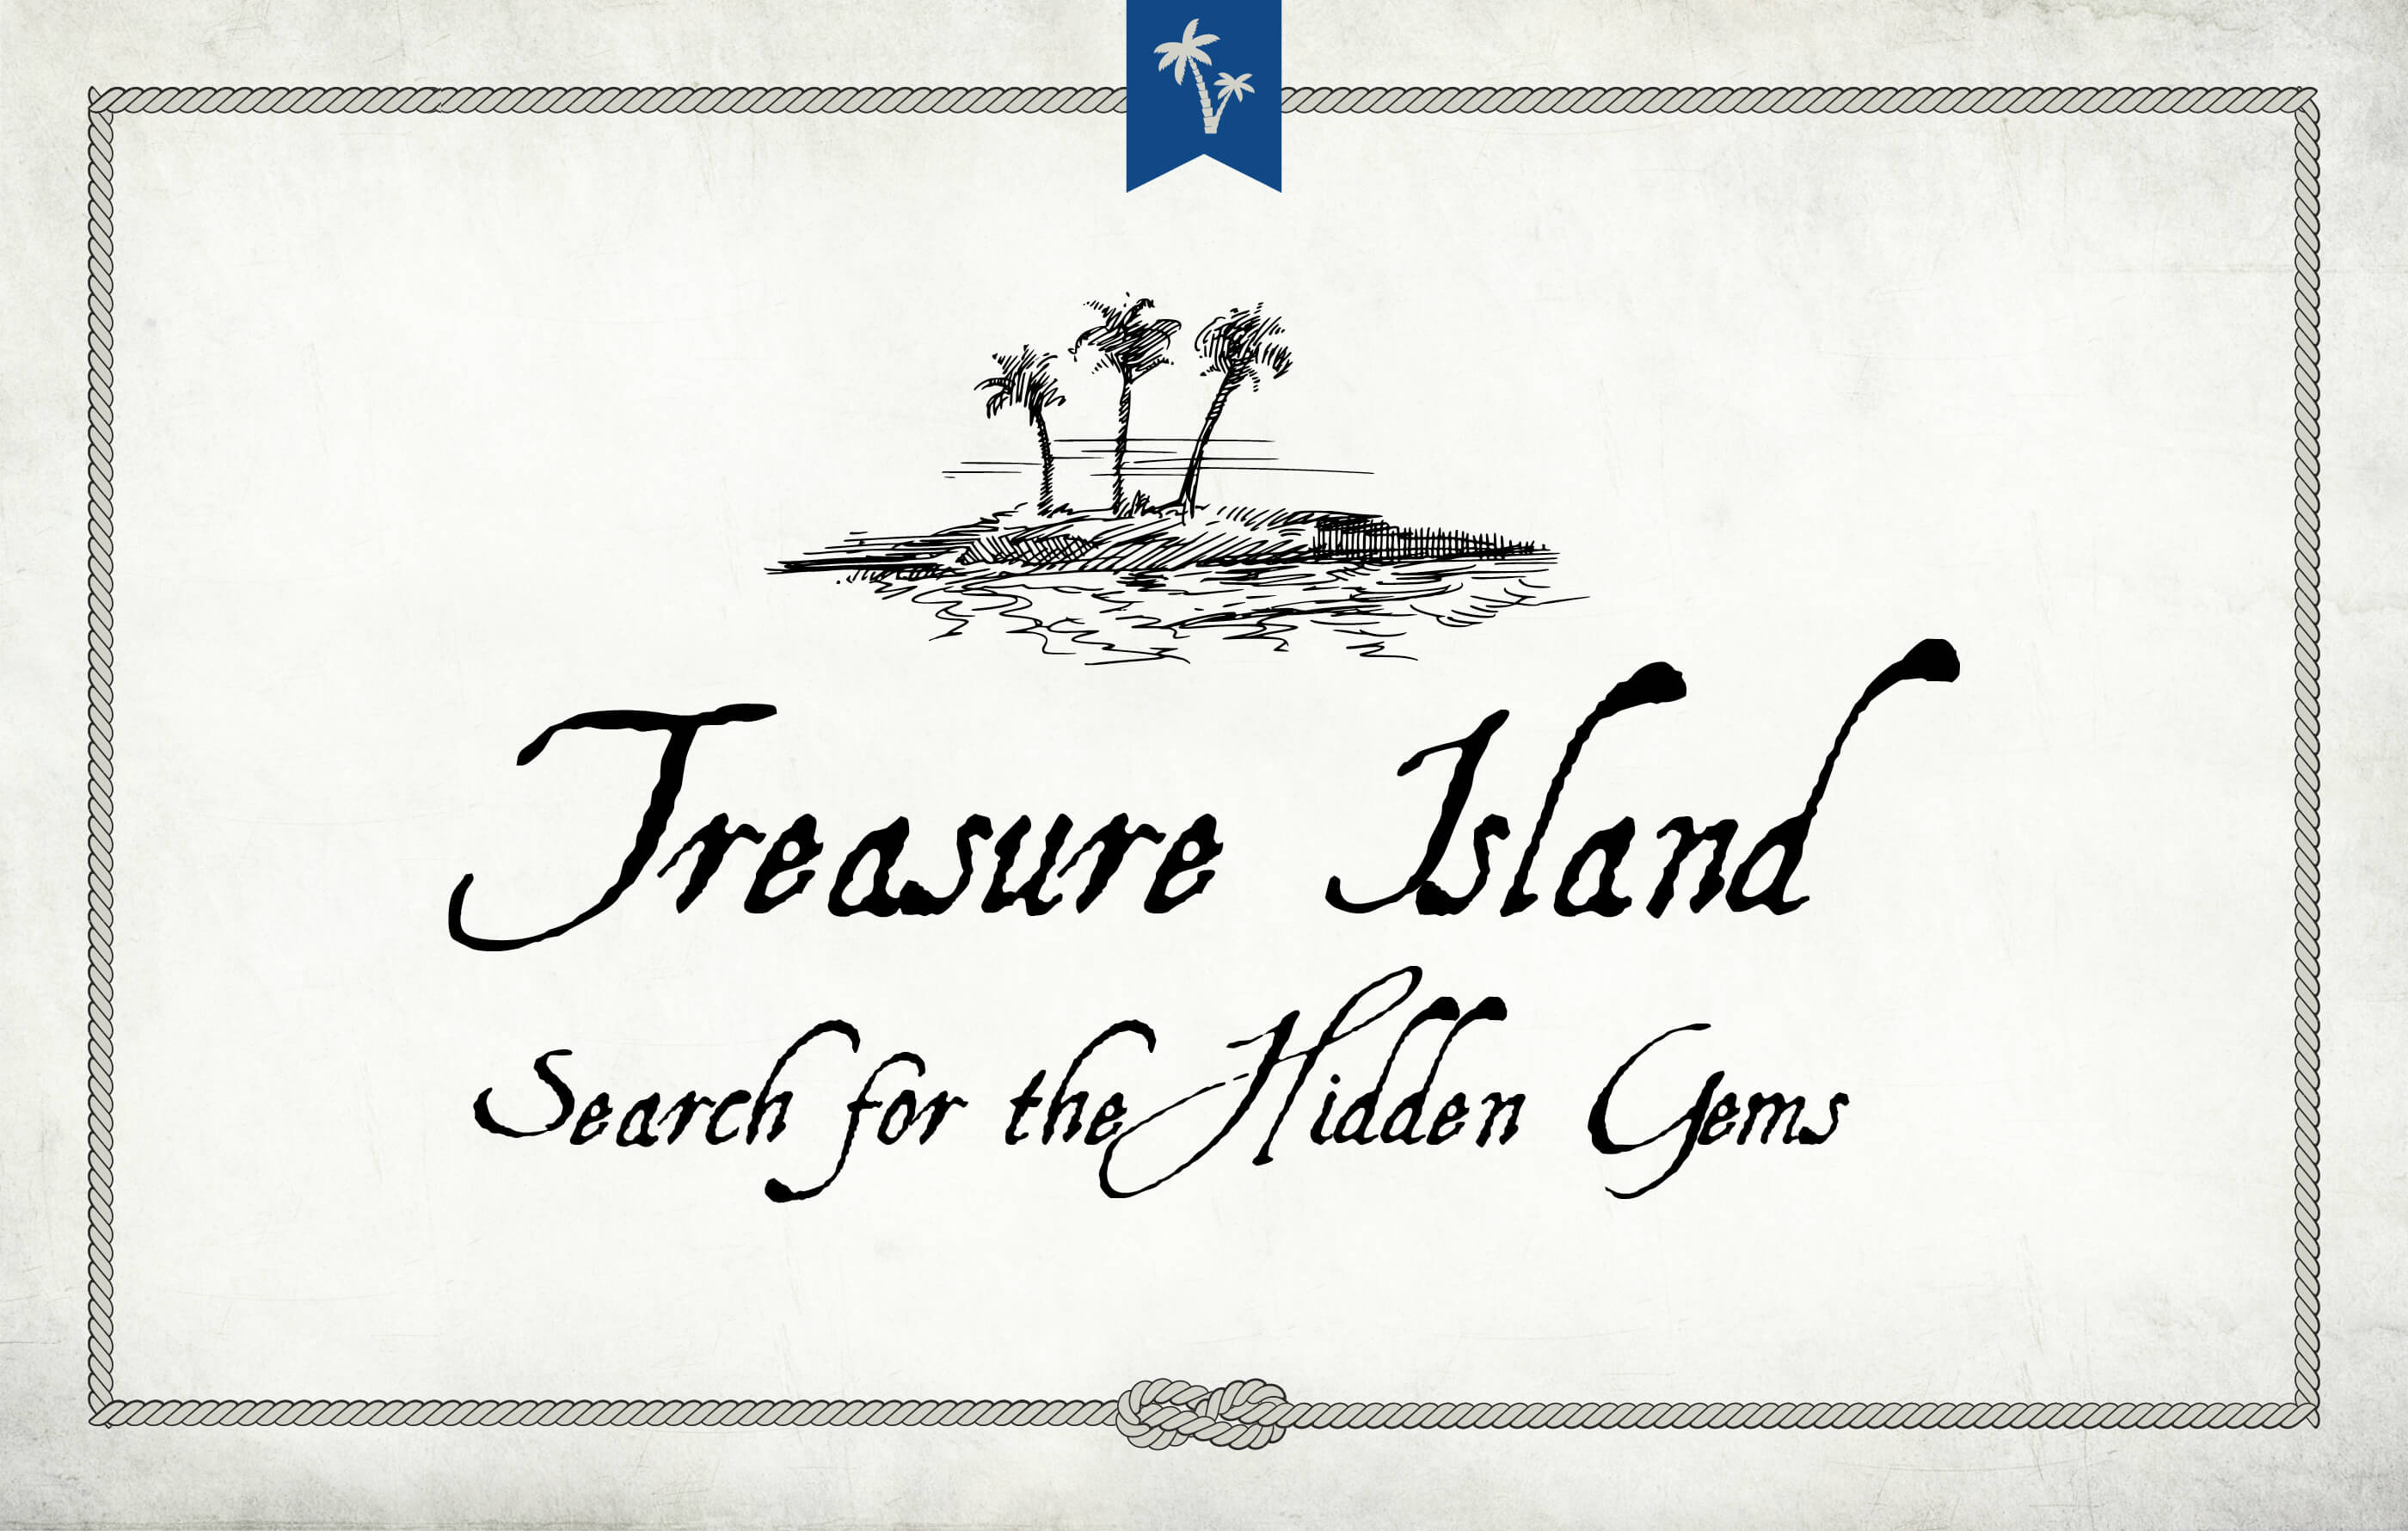 Rough hand-drawn illustration of a tropical island and three palm trees, placed above the 'Treasure Island' title in black on a vintage, weathered background with rope border